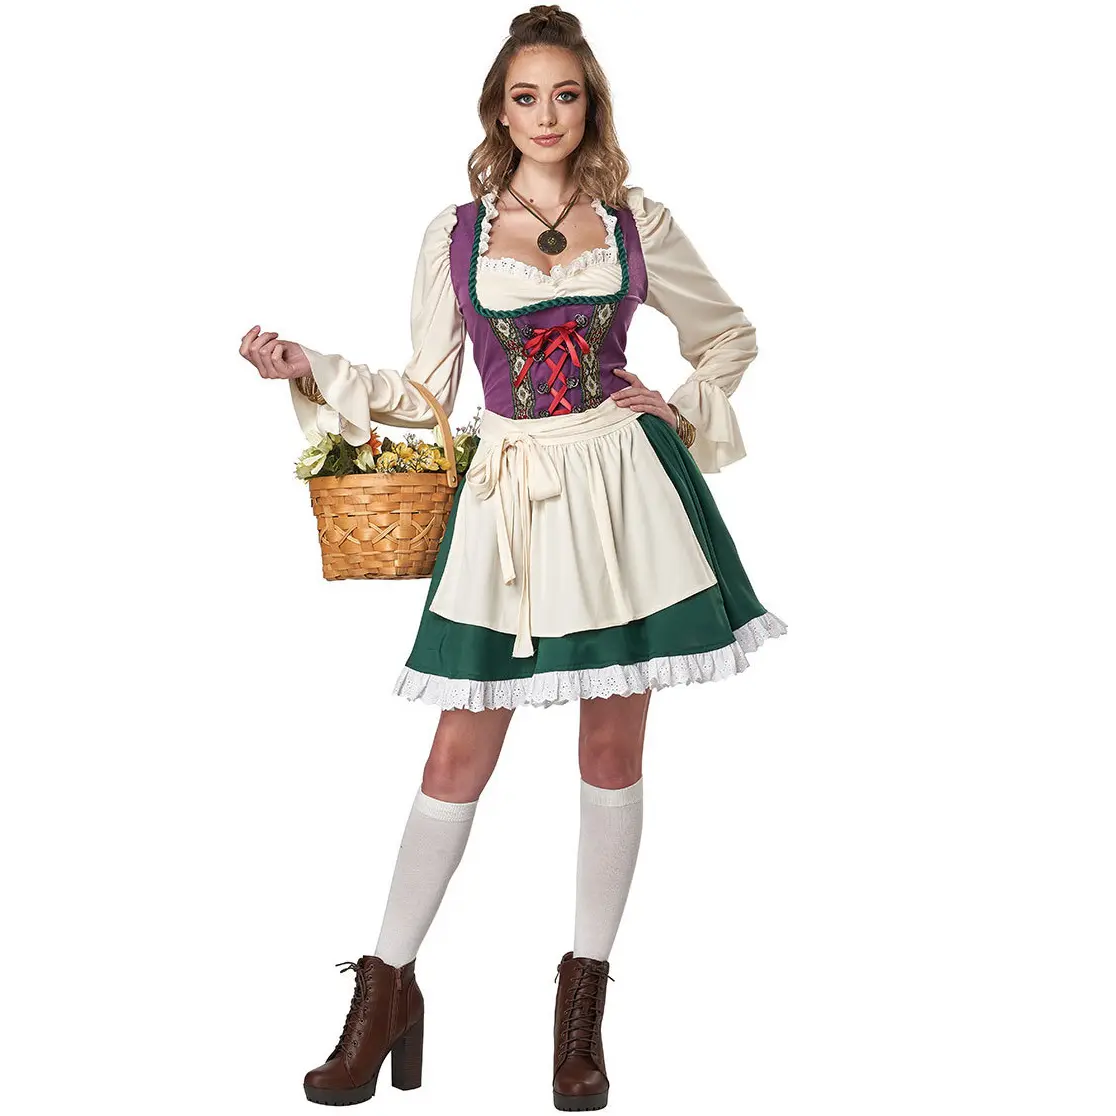 Women' Beer Festival Costume Bavarian National Dress Green Dress Green Maid with Apron for Adults Women